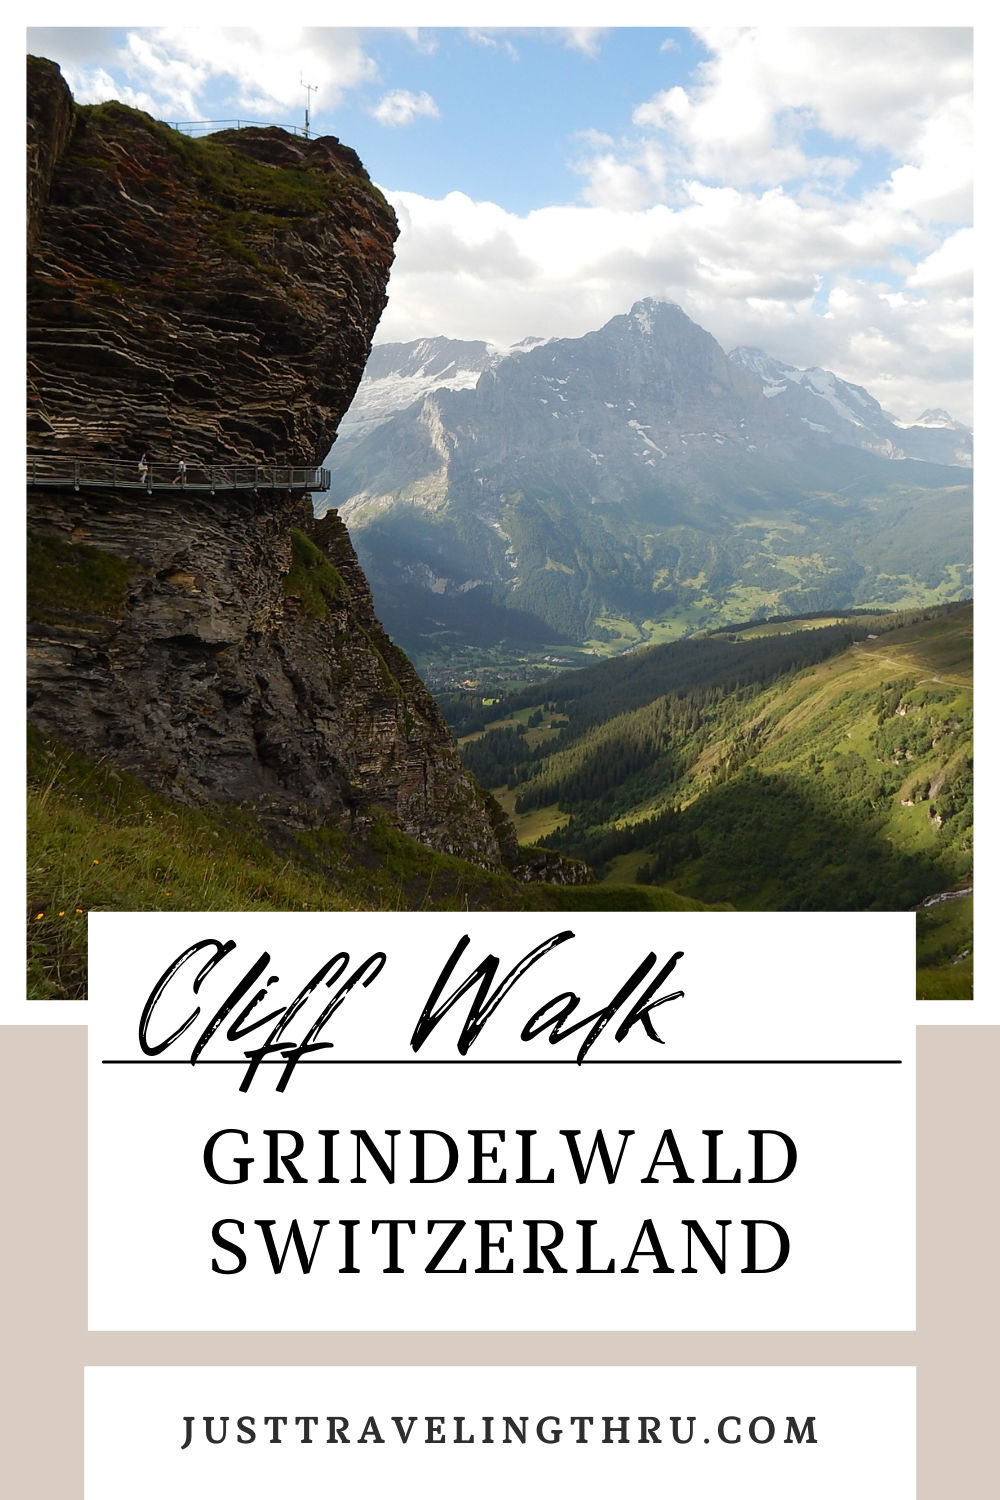 Grindelwald Switzerland - A description and images from our Trip there.